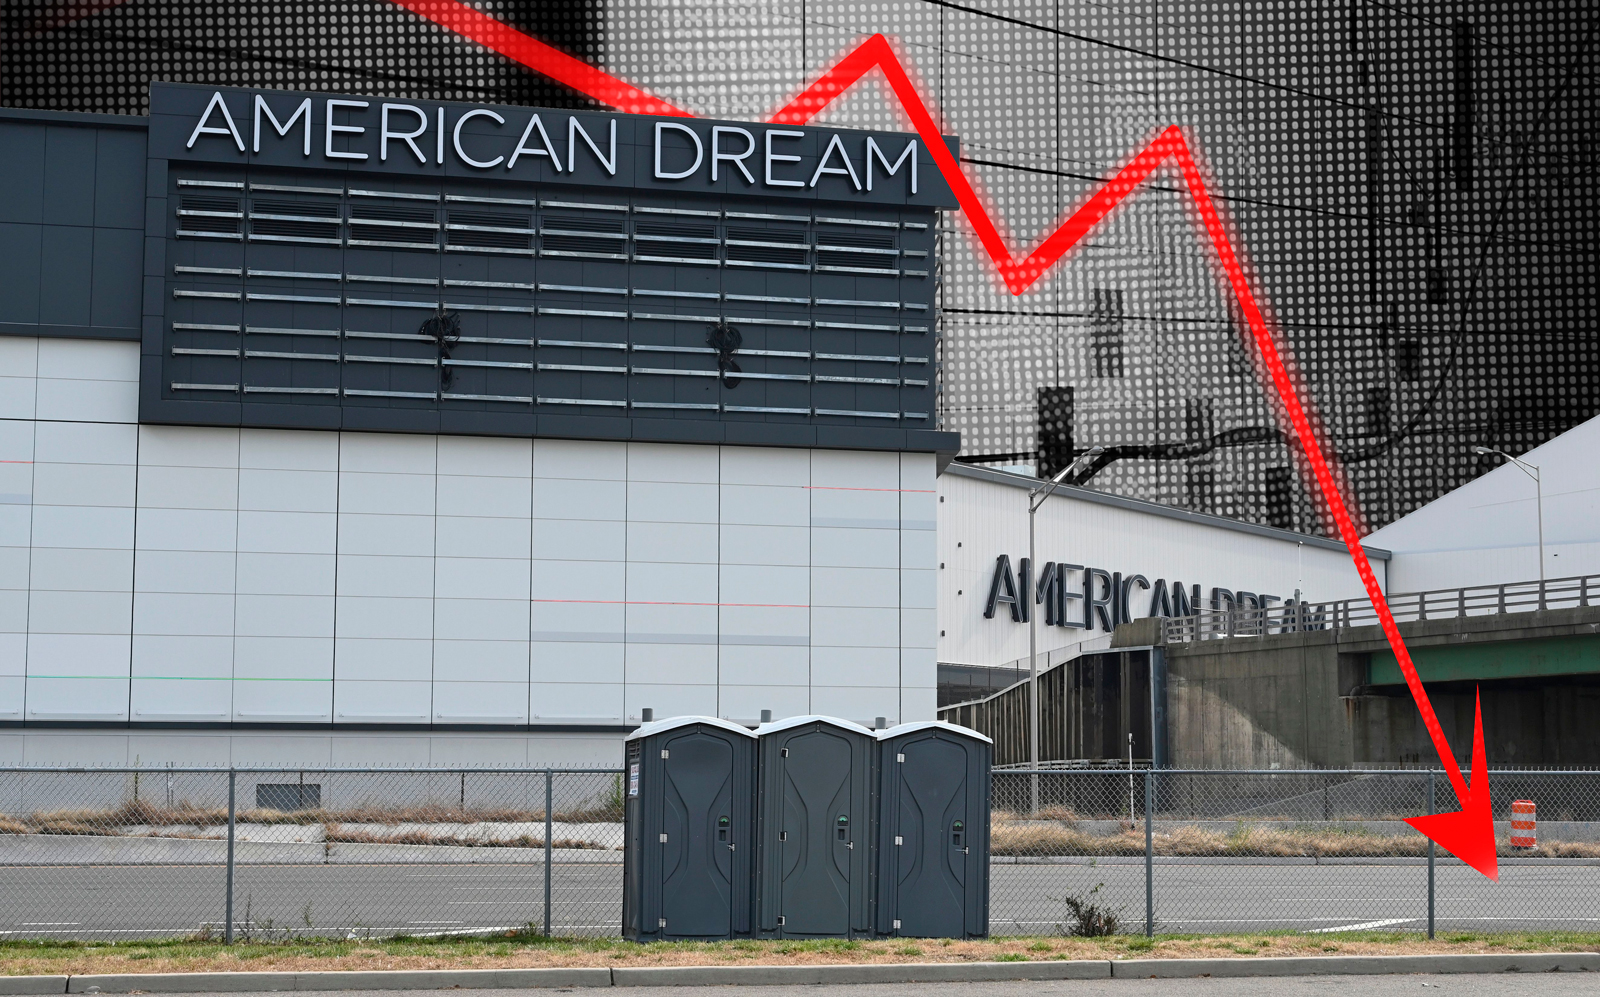 The American Dream Mall in New Jersey (Getty Images; iStock)